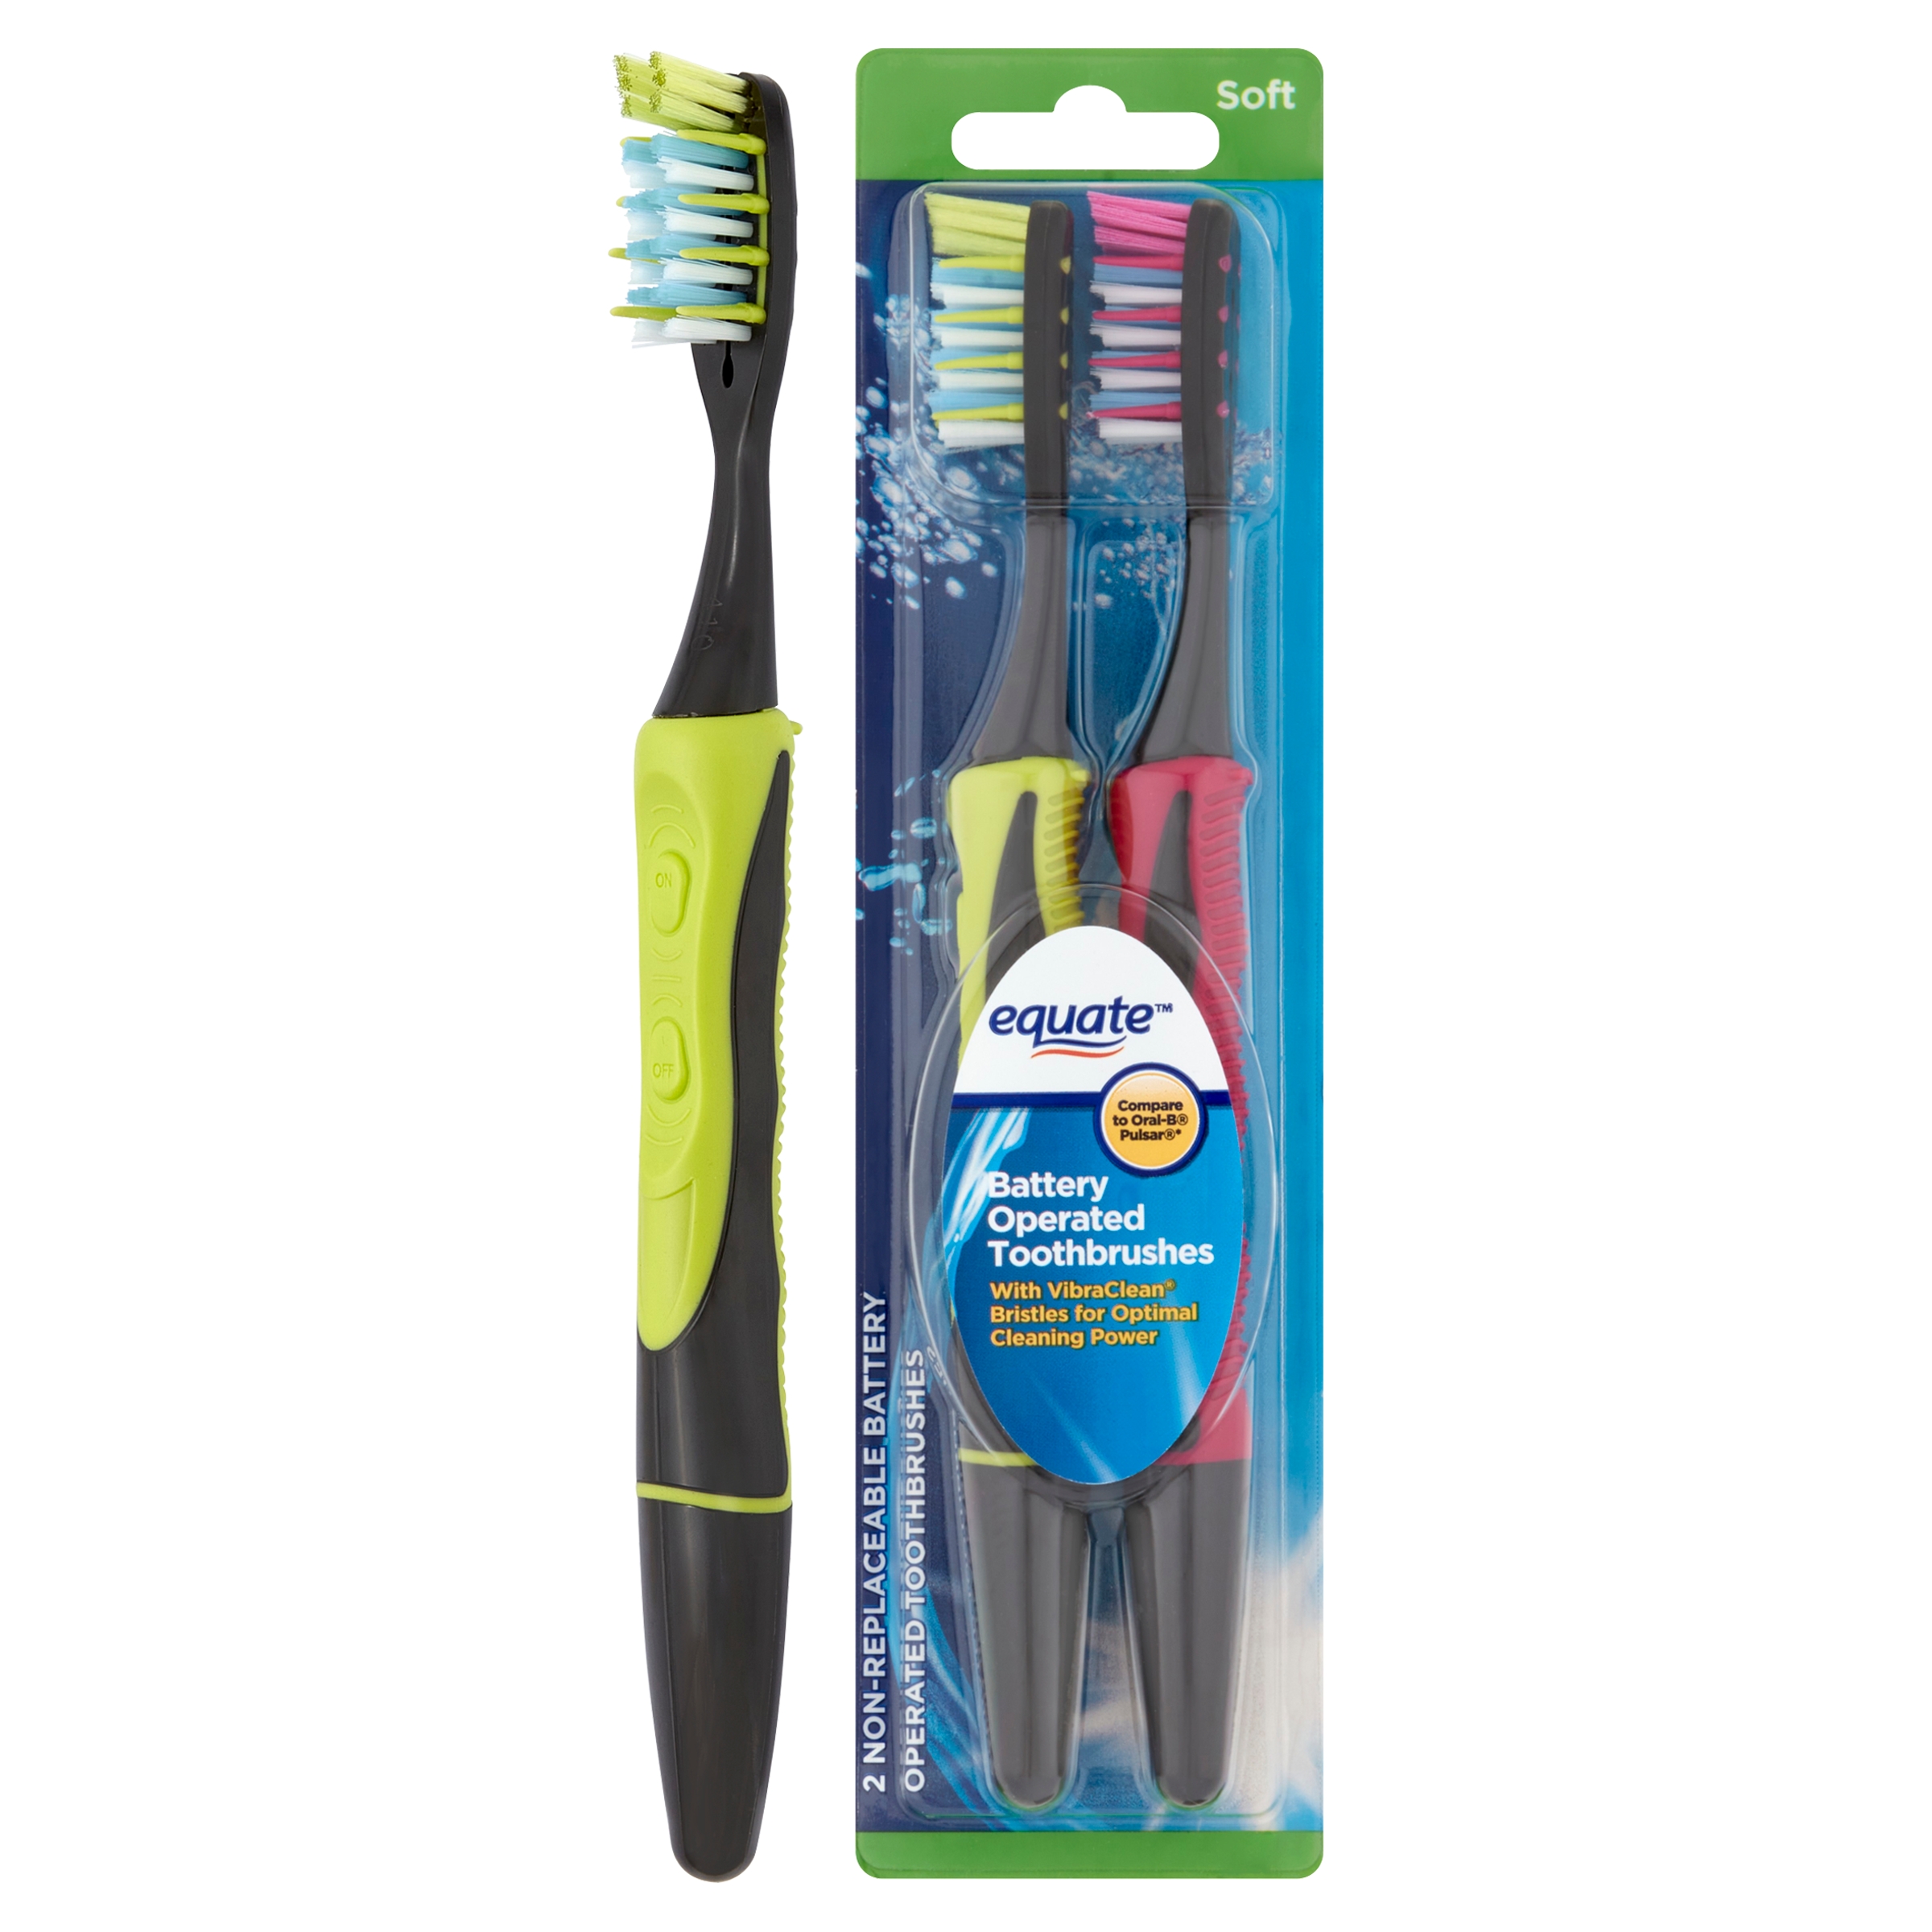 Equate Polaris Deep Cleaning VibraClean Toothbrush, Deep Cleaning Soft Bristles, Helps Remove Plaque, 2 Count - image 1 of 12